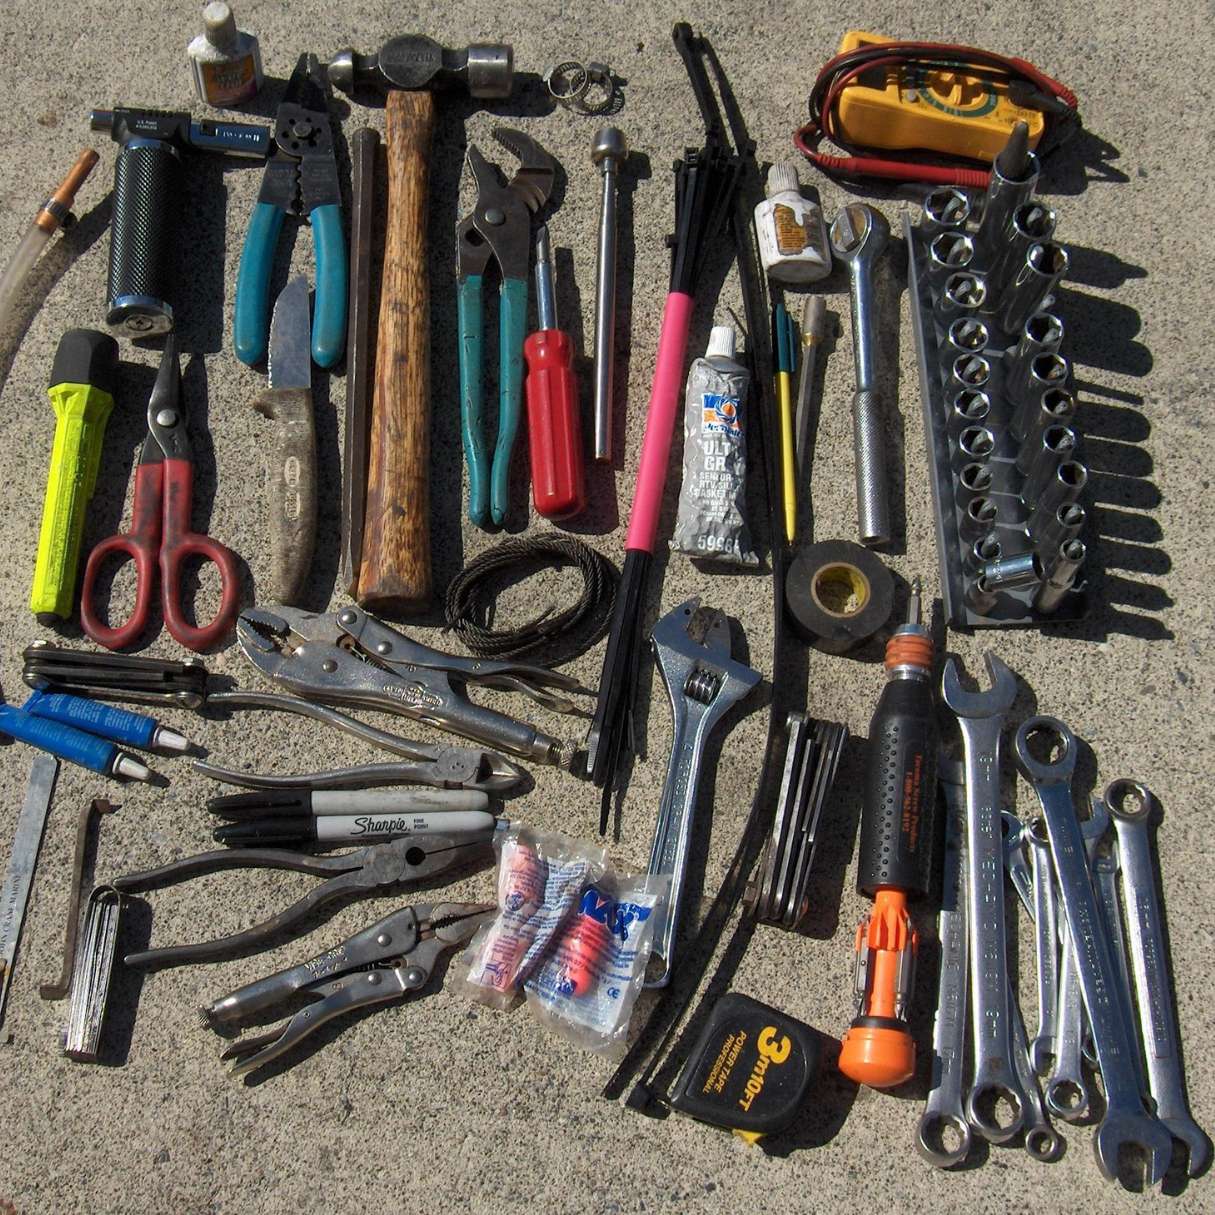 How To Identify Hand Tools For Inventory